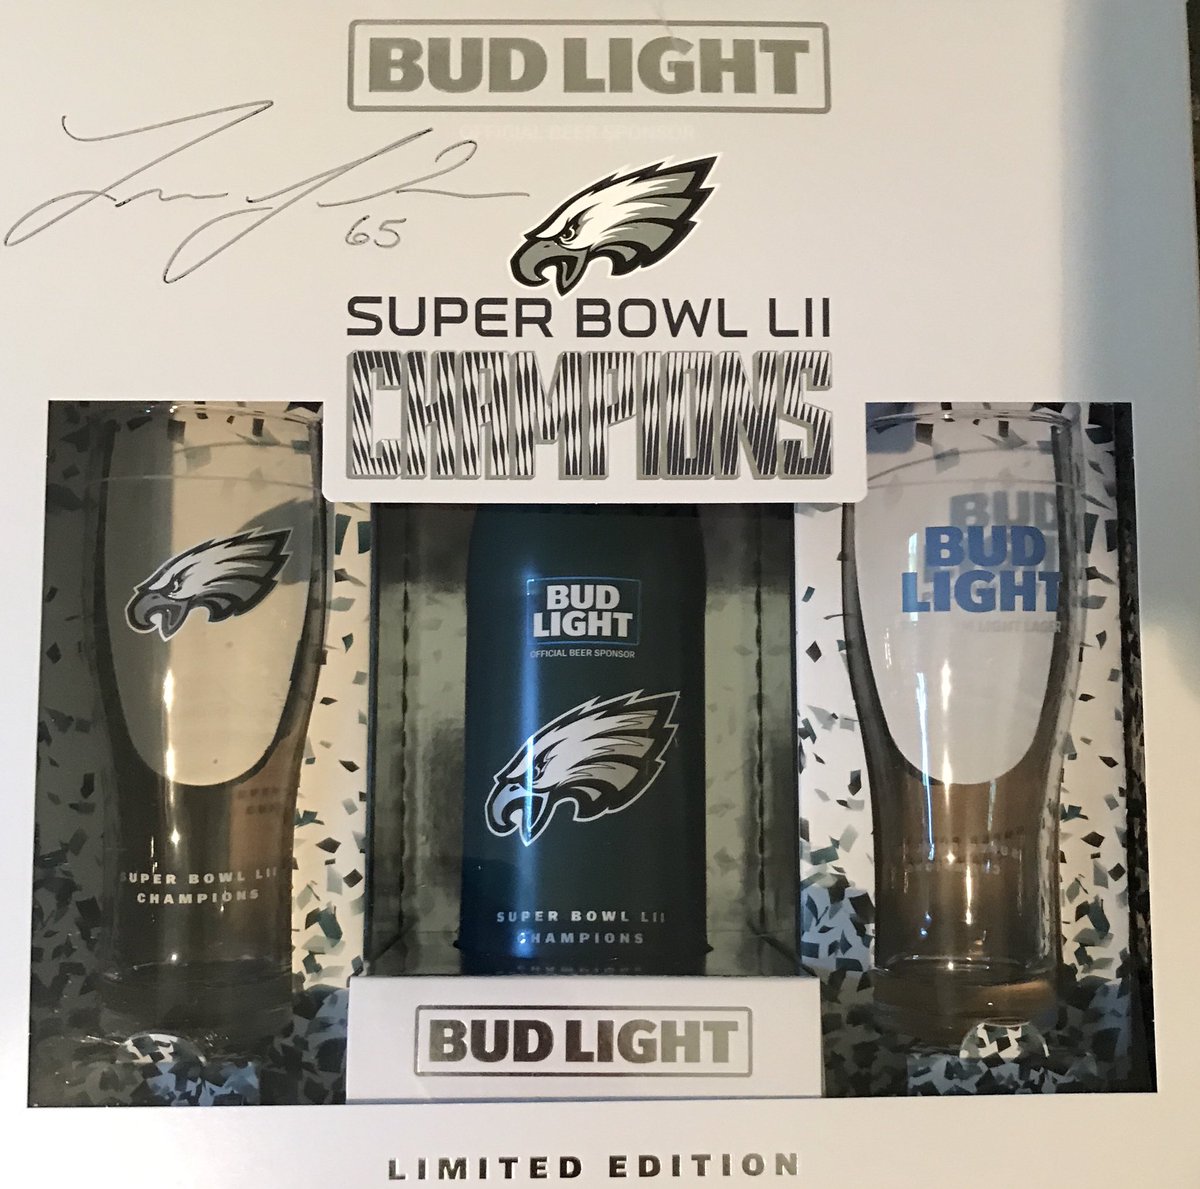 Super Bowl packs, corresponding to the date of Super Bowl win, includes Sup...